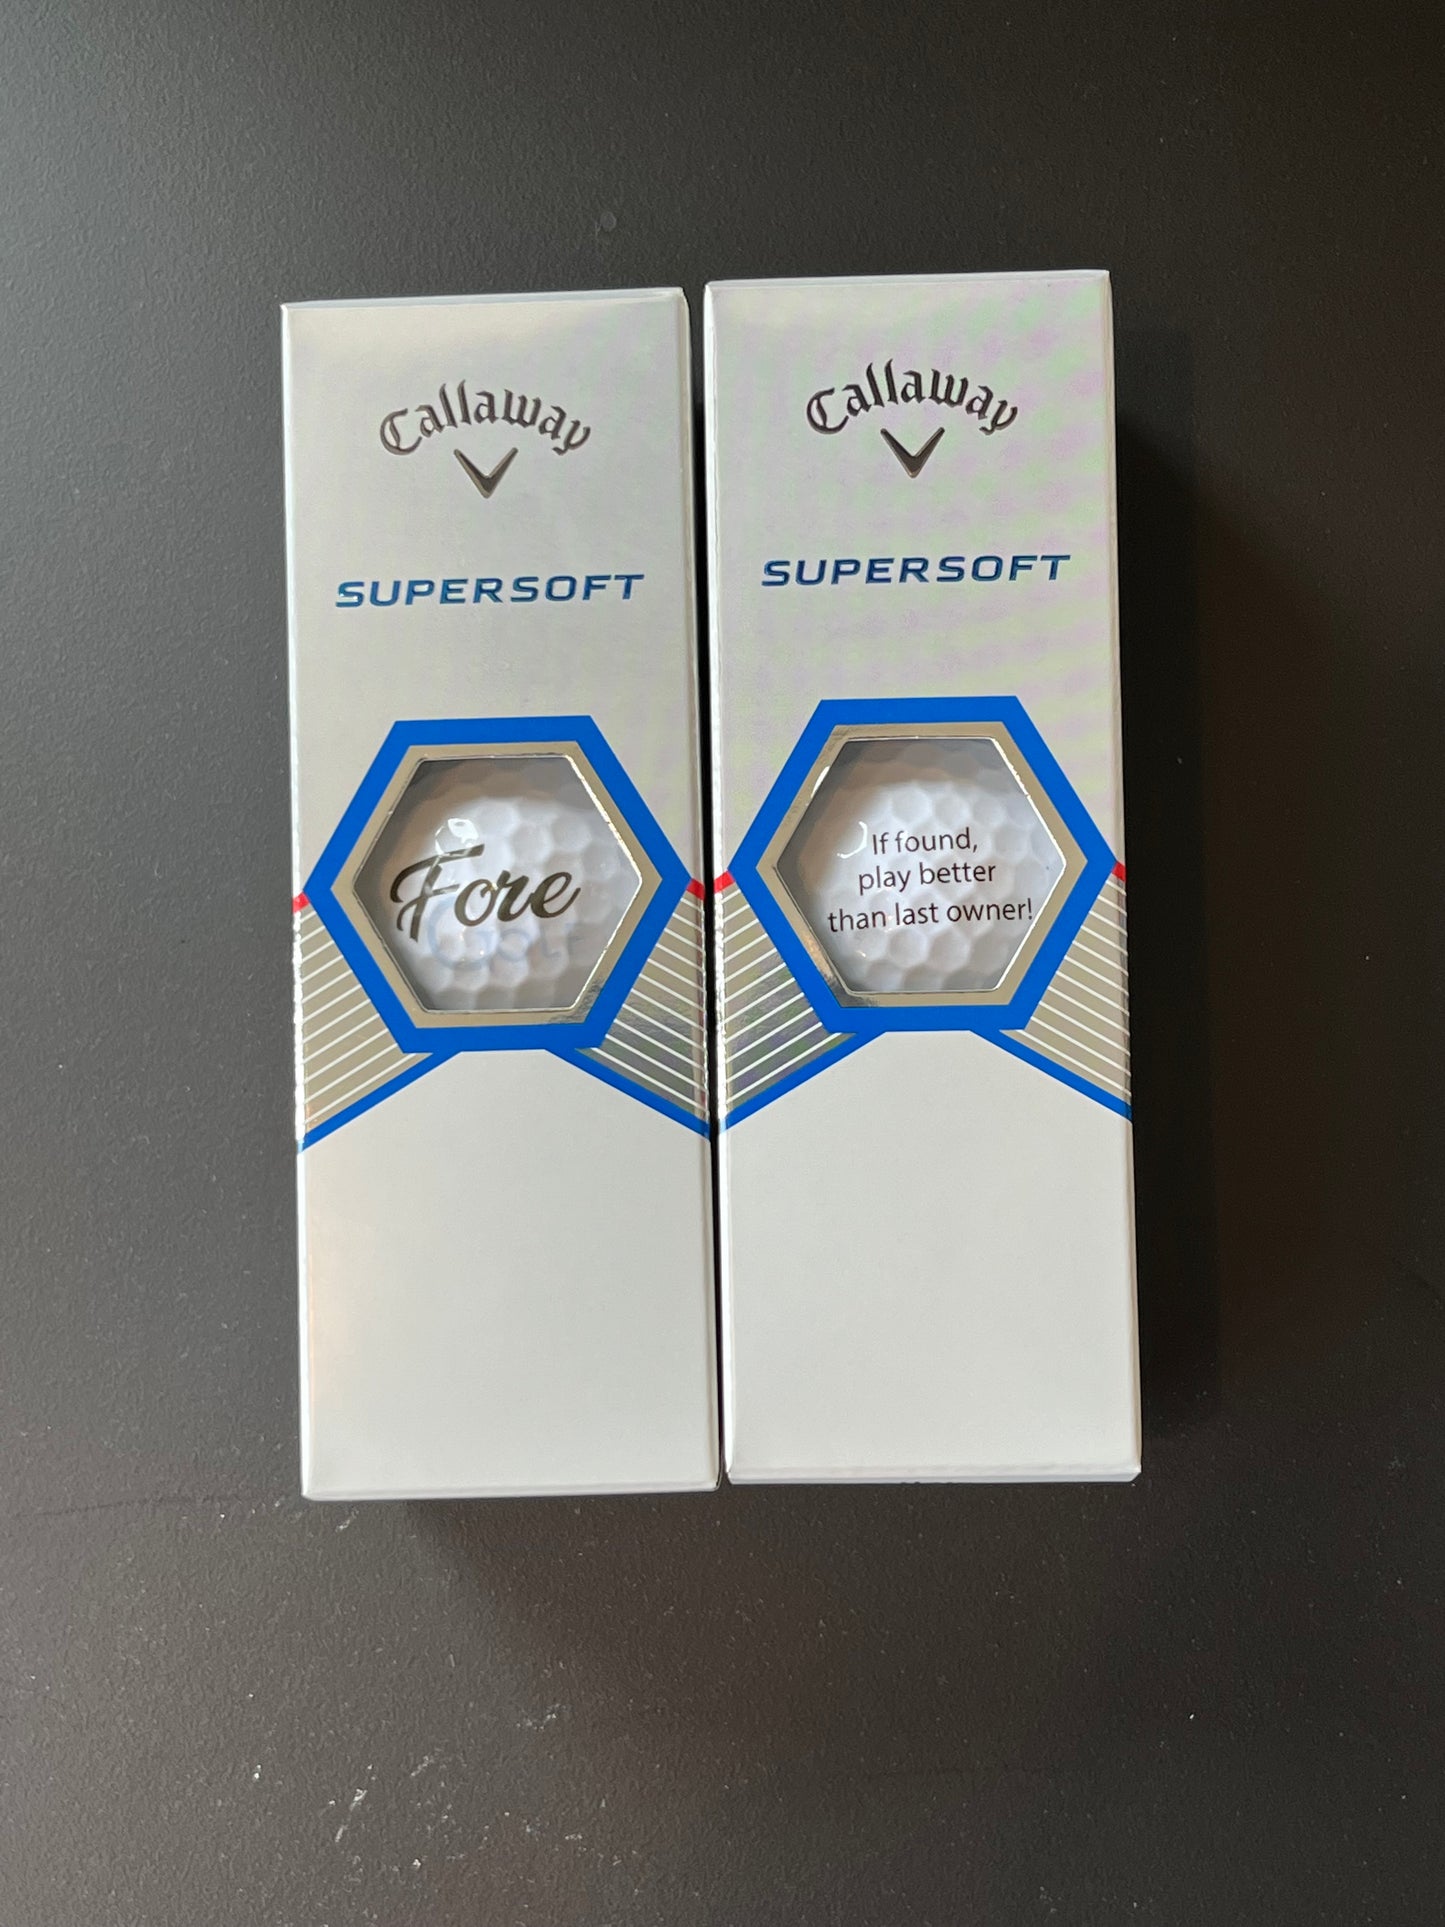 Callaway Supersoft    If found play better!